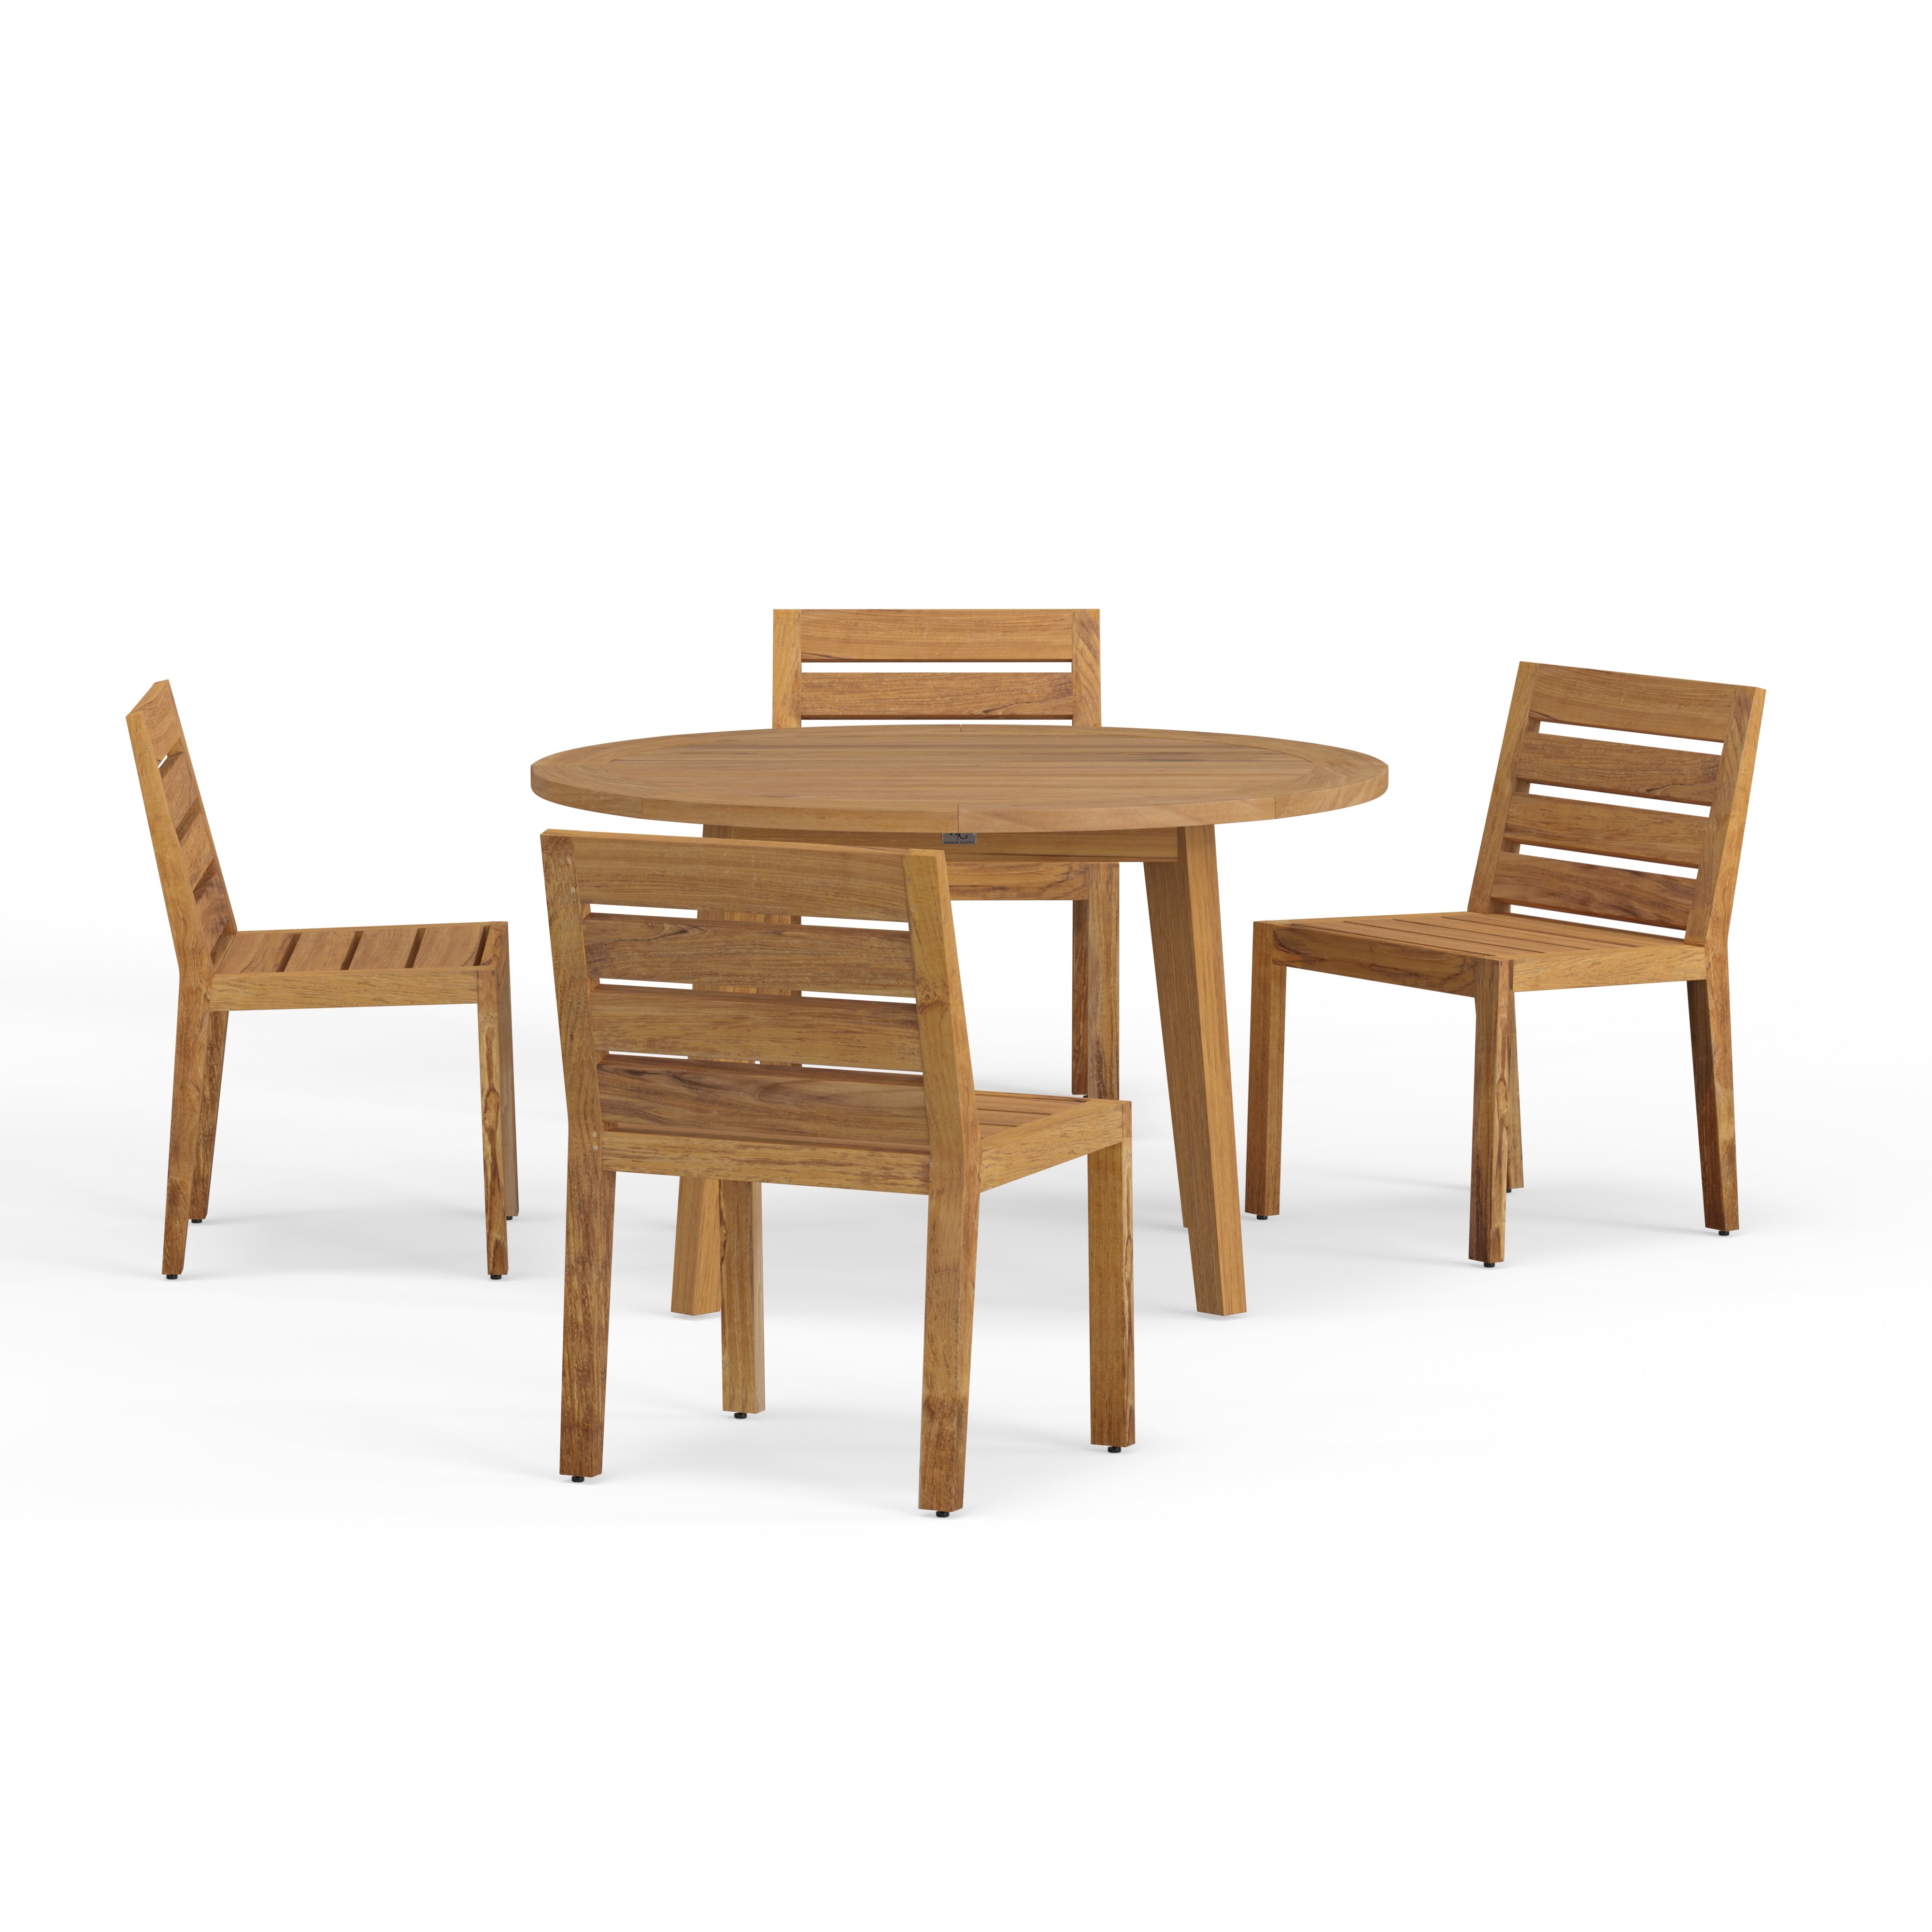 5 Piece All Teak Dining Set For Outdoor